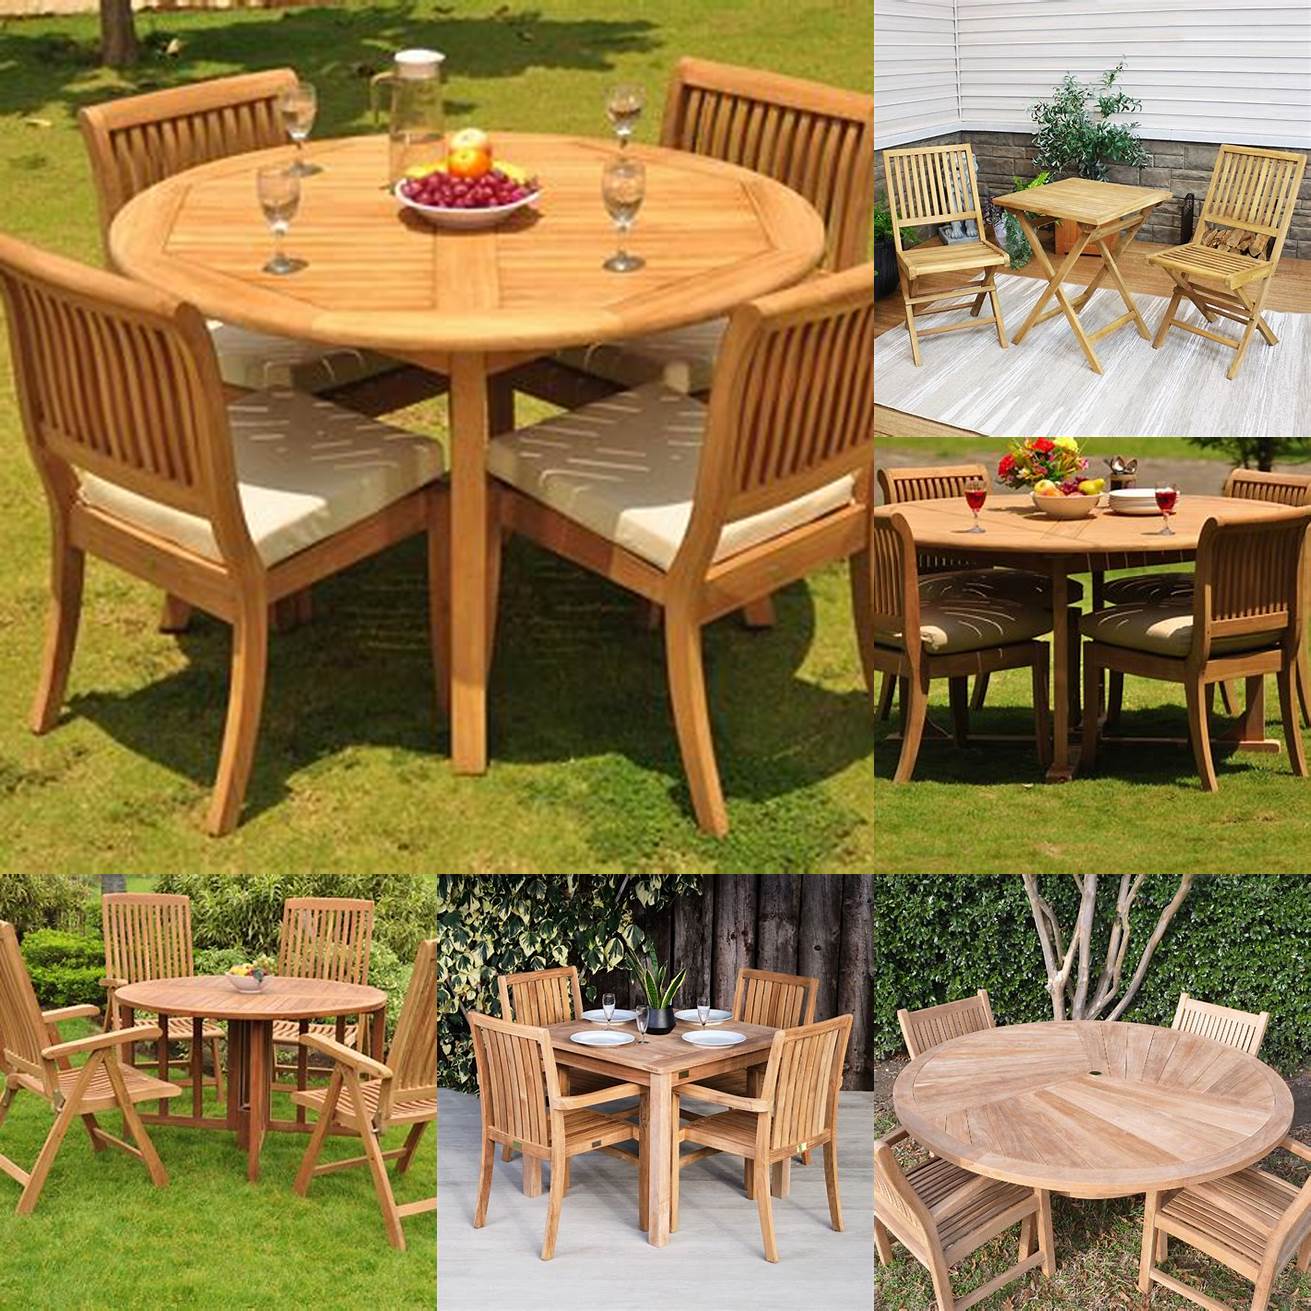 1 Teak Table and Chairs